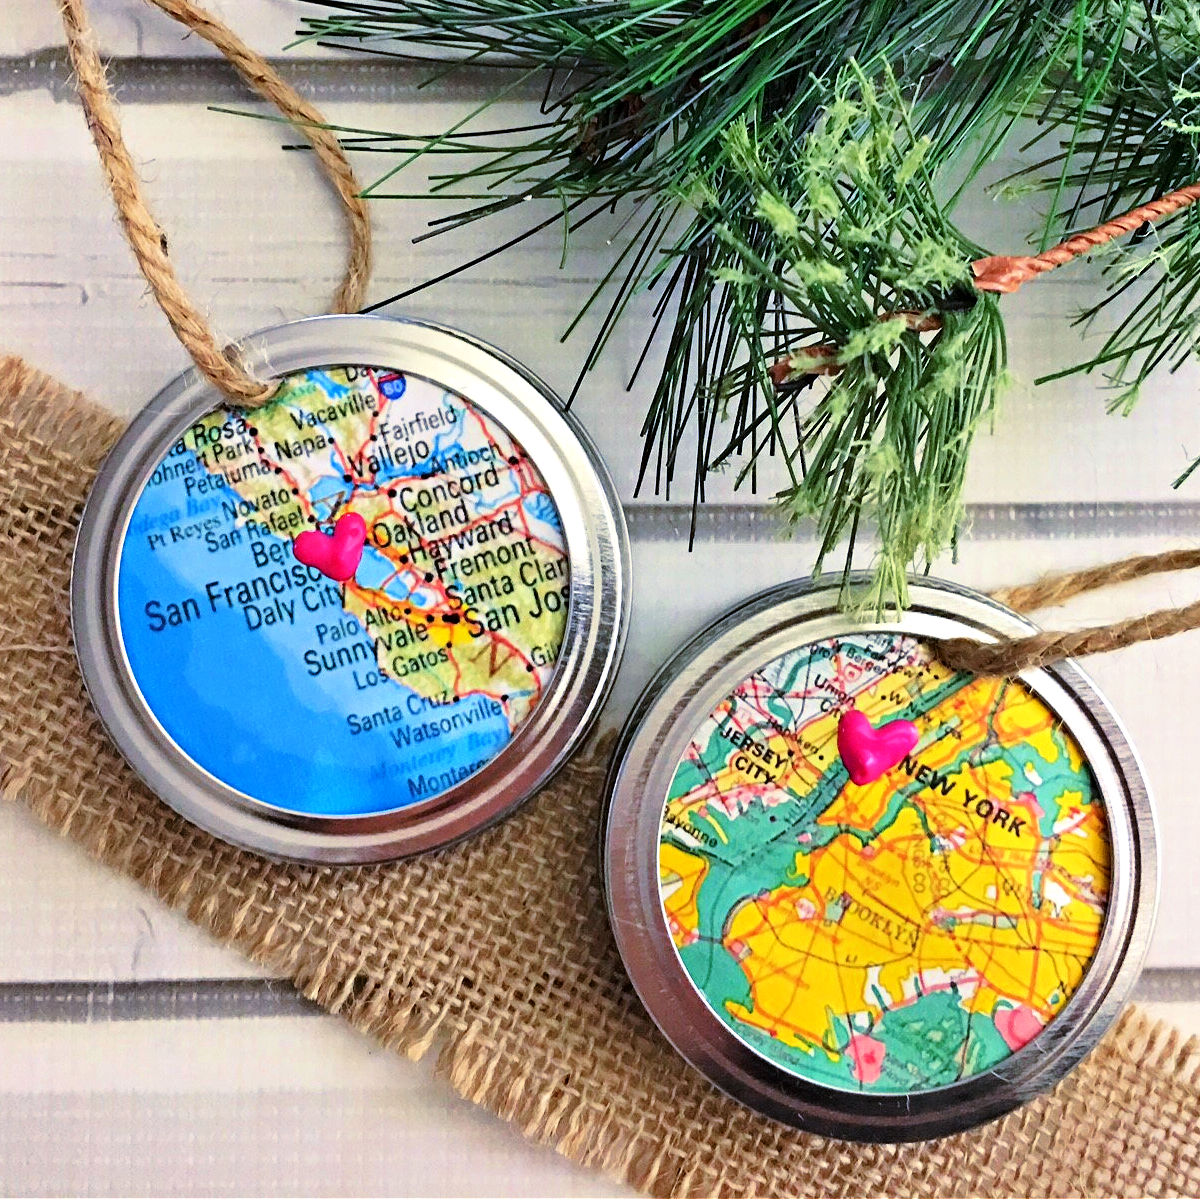 Two Mason Jar Ring Map ornaments with burlap and artificial Christmas tree branches on a vintage white wood table.